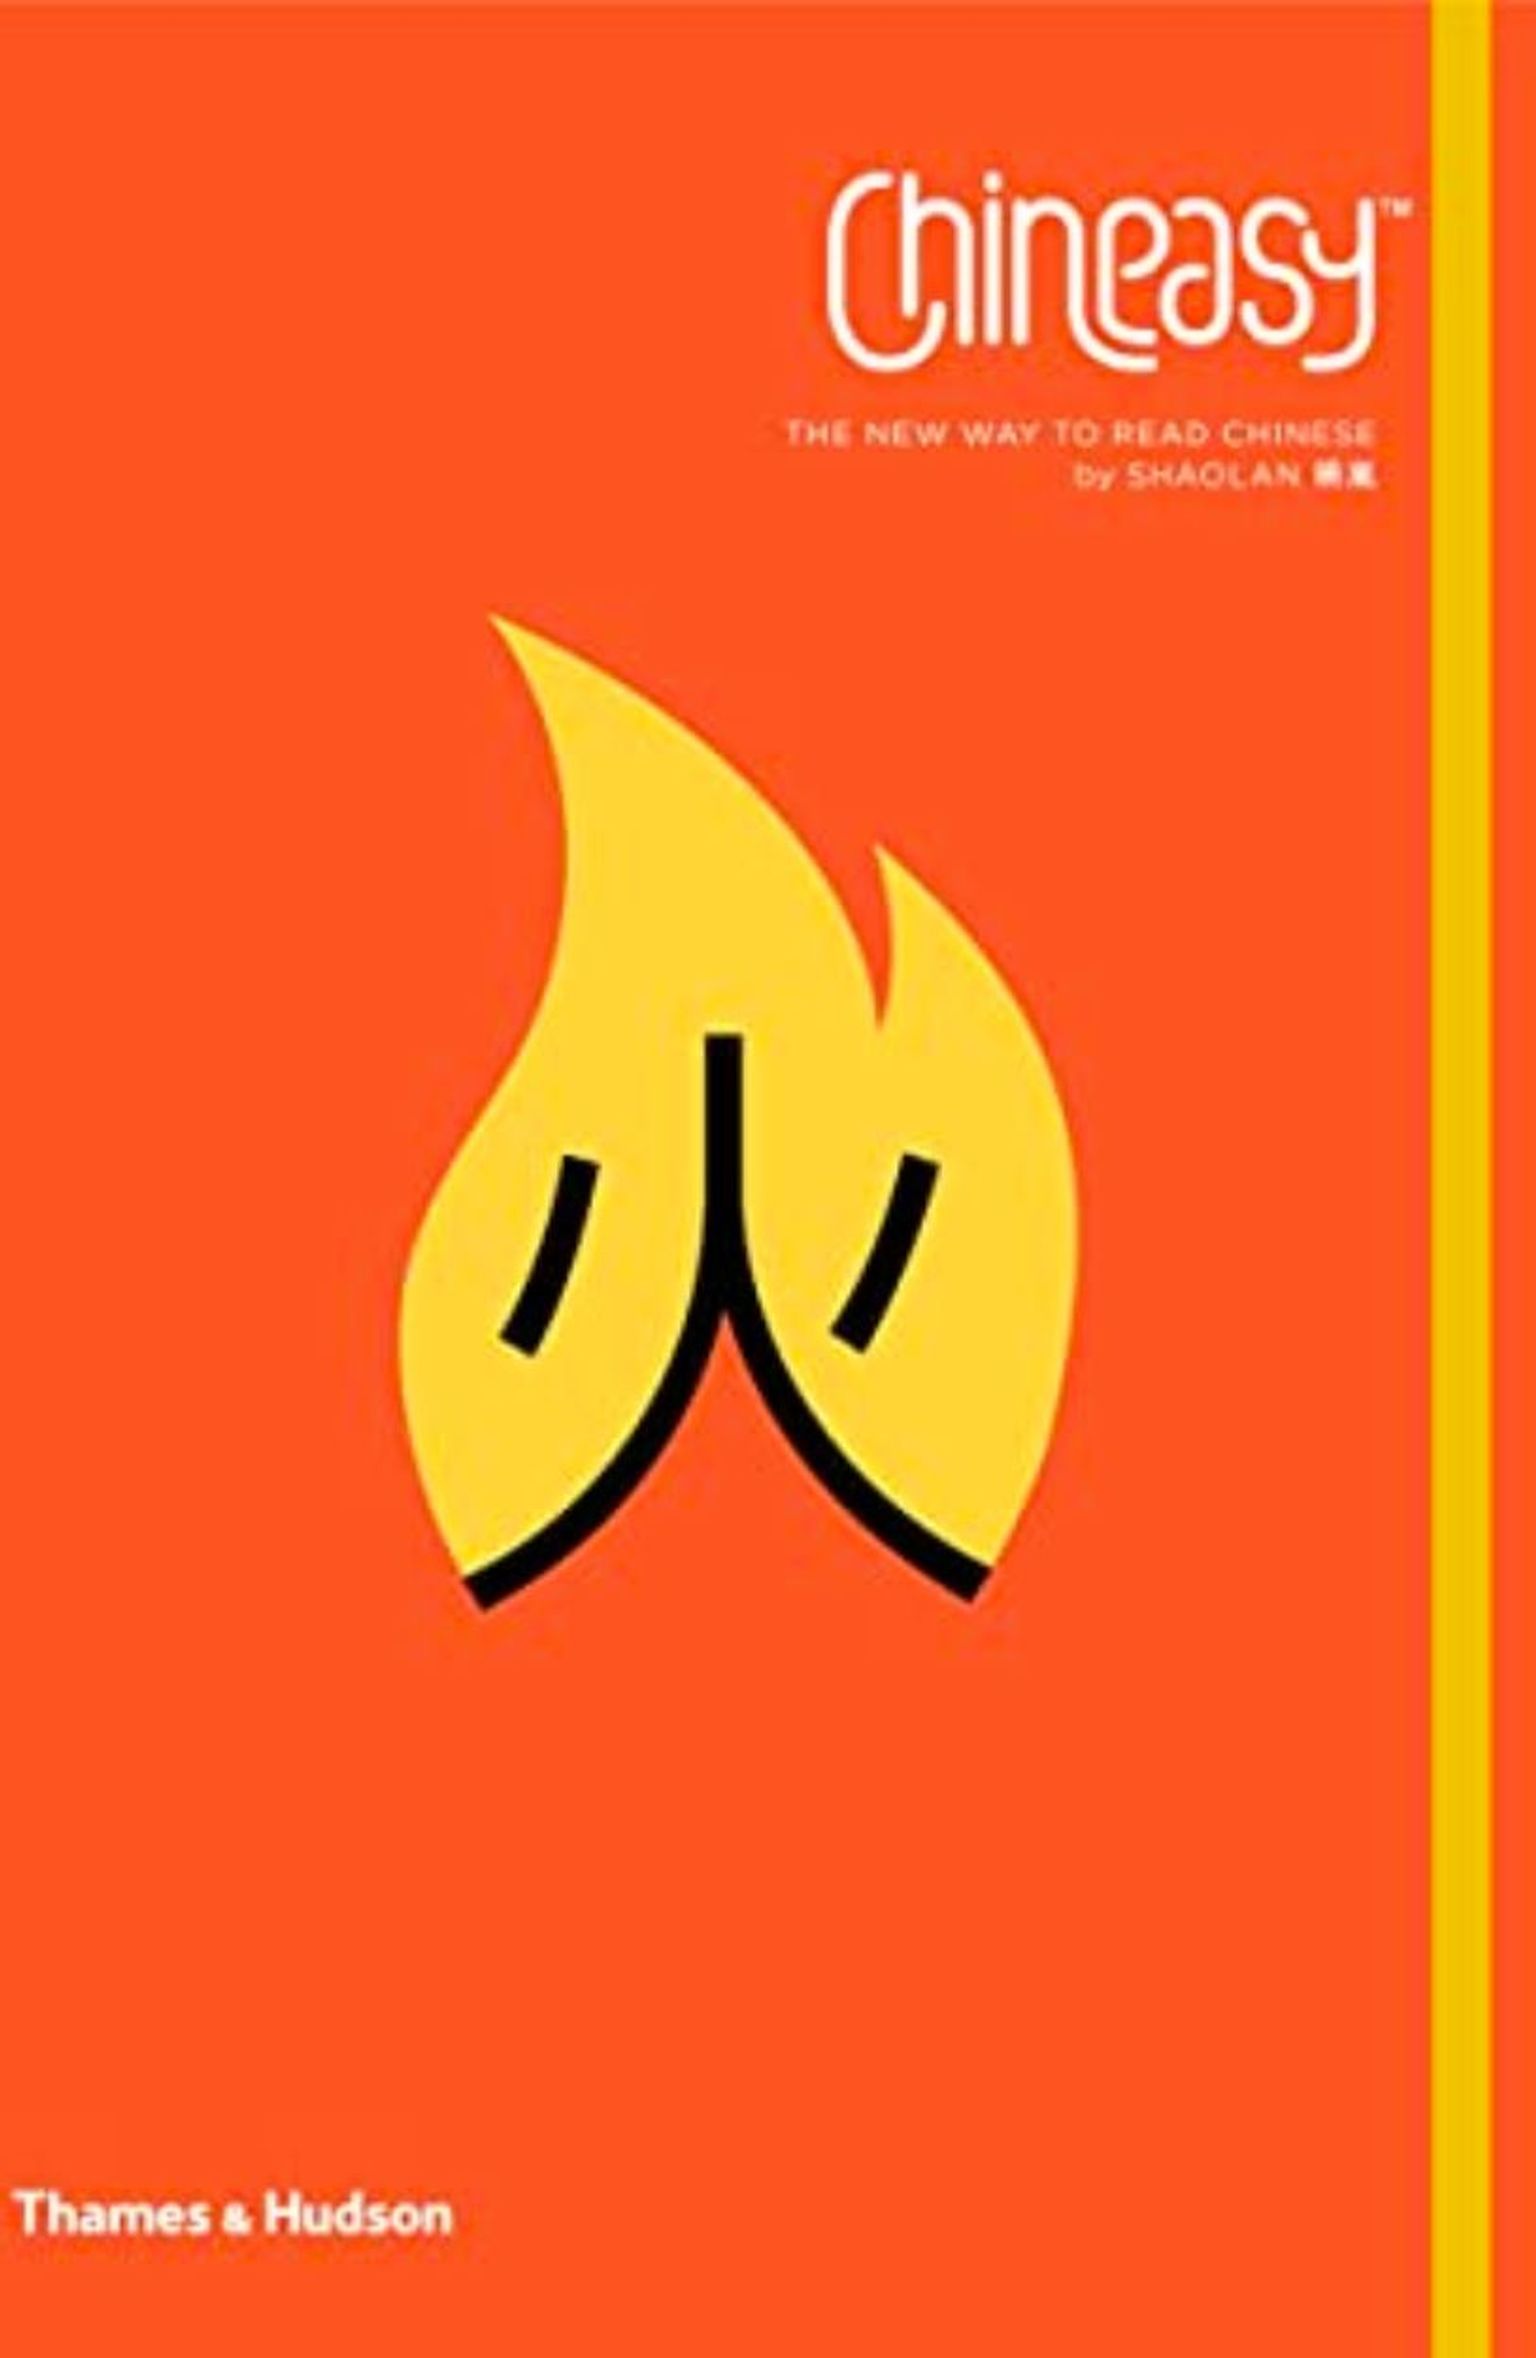 Book Recommendations - Chineasy